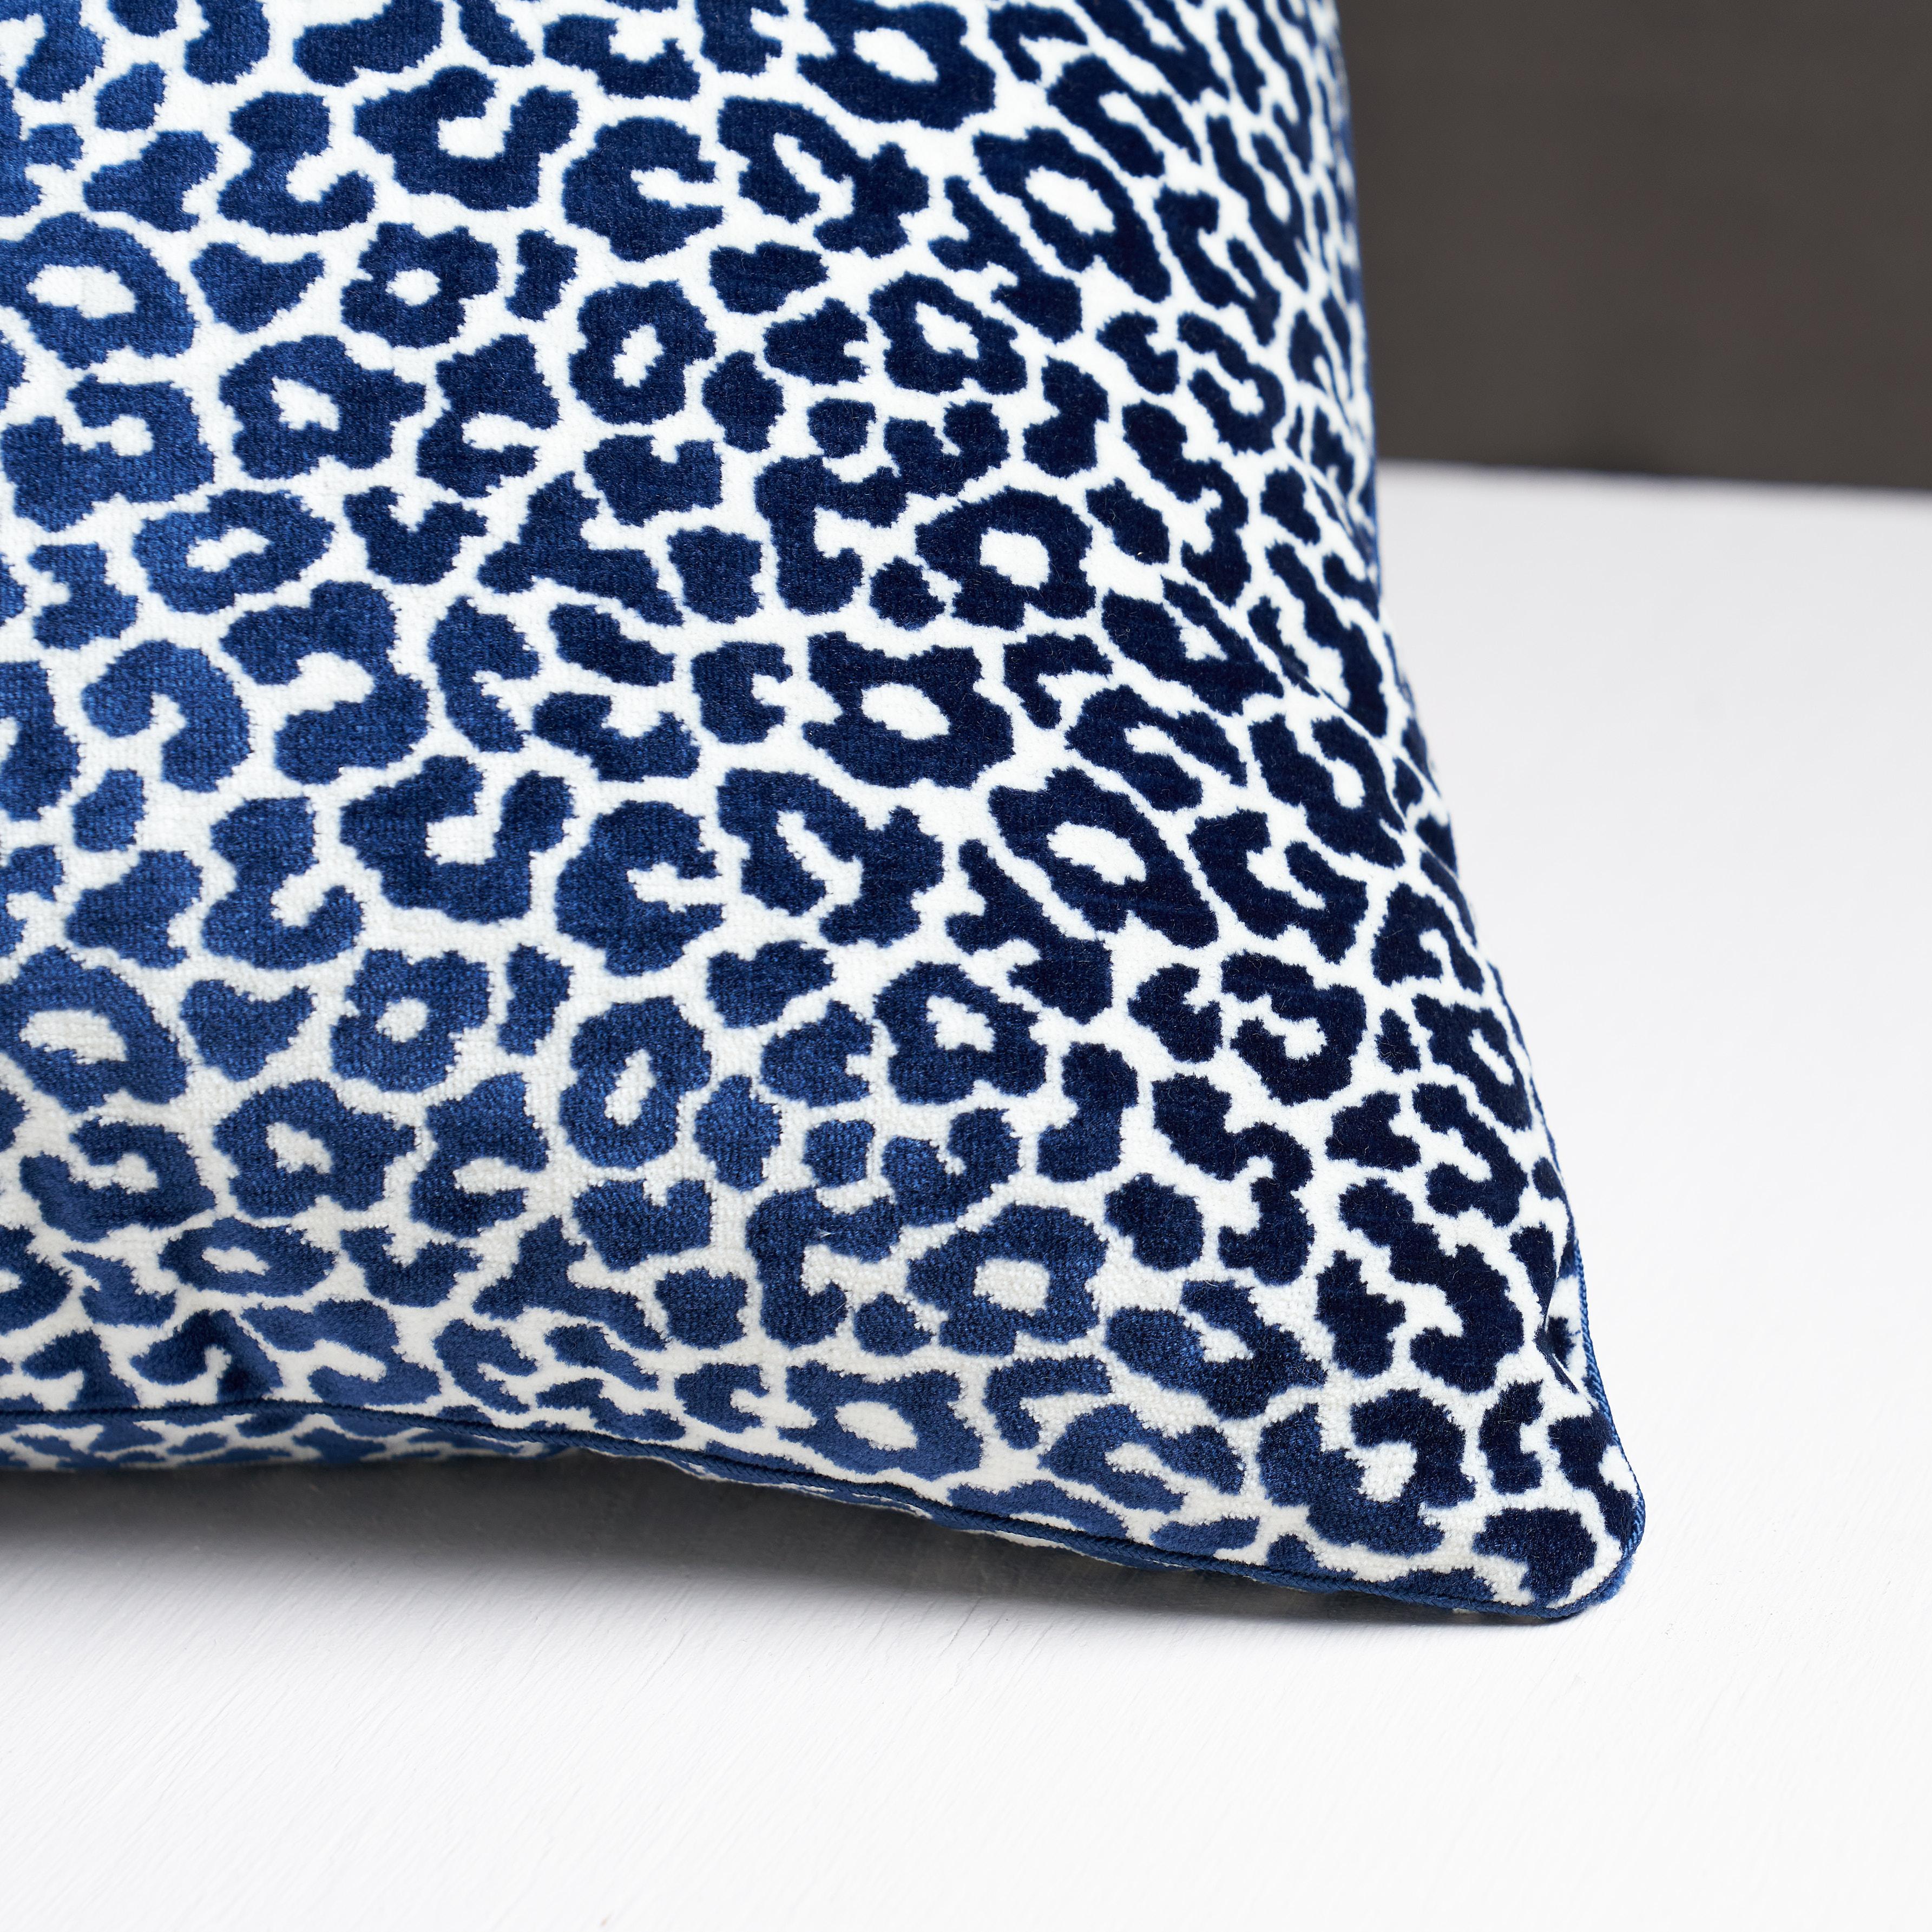 This pillow features Madeleine by Timothy Corrigan for Schumacher. Named for Madeleine Castaing, the iconic French decorator known for her love of leopard prints, small-scale spots and soft pile make this velvet endlessly versatile. Pillow is